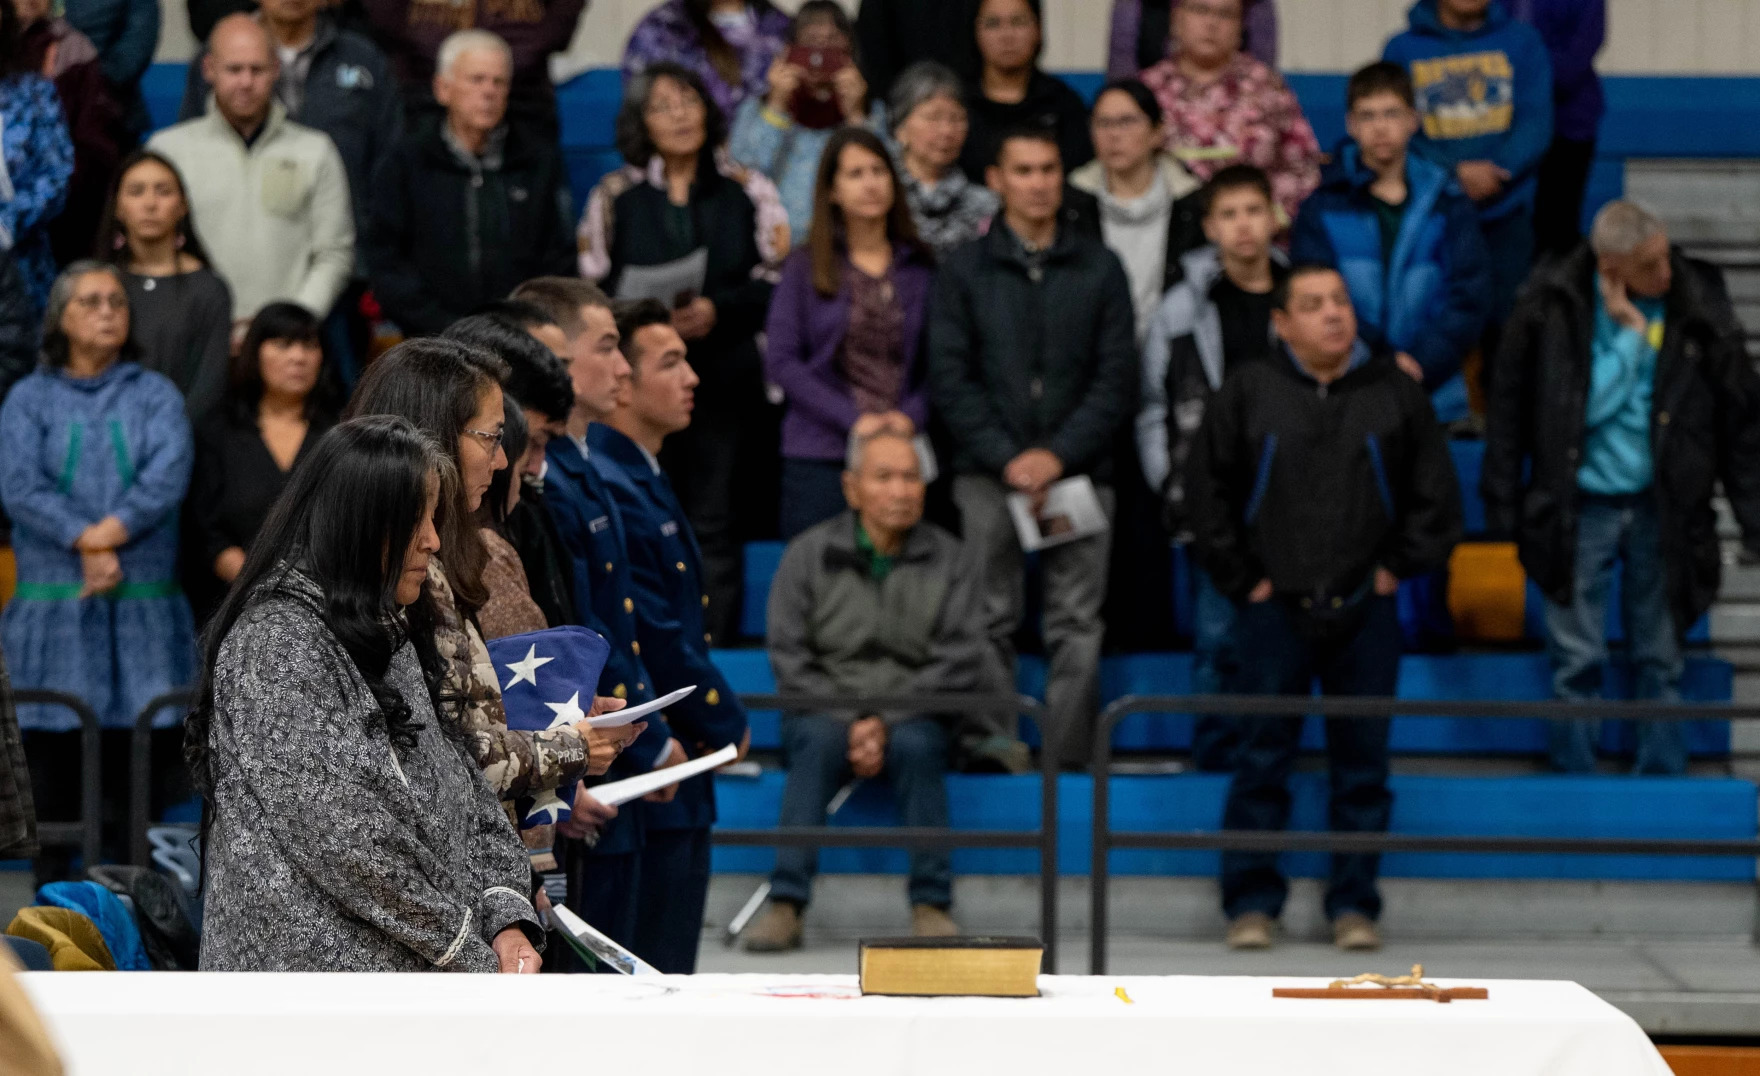 people stand in a line, near a casket, as a crowd looks on in a school gym